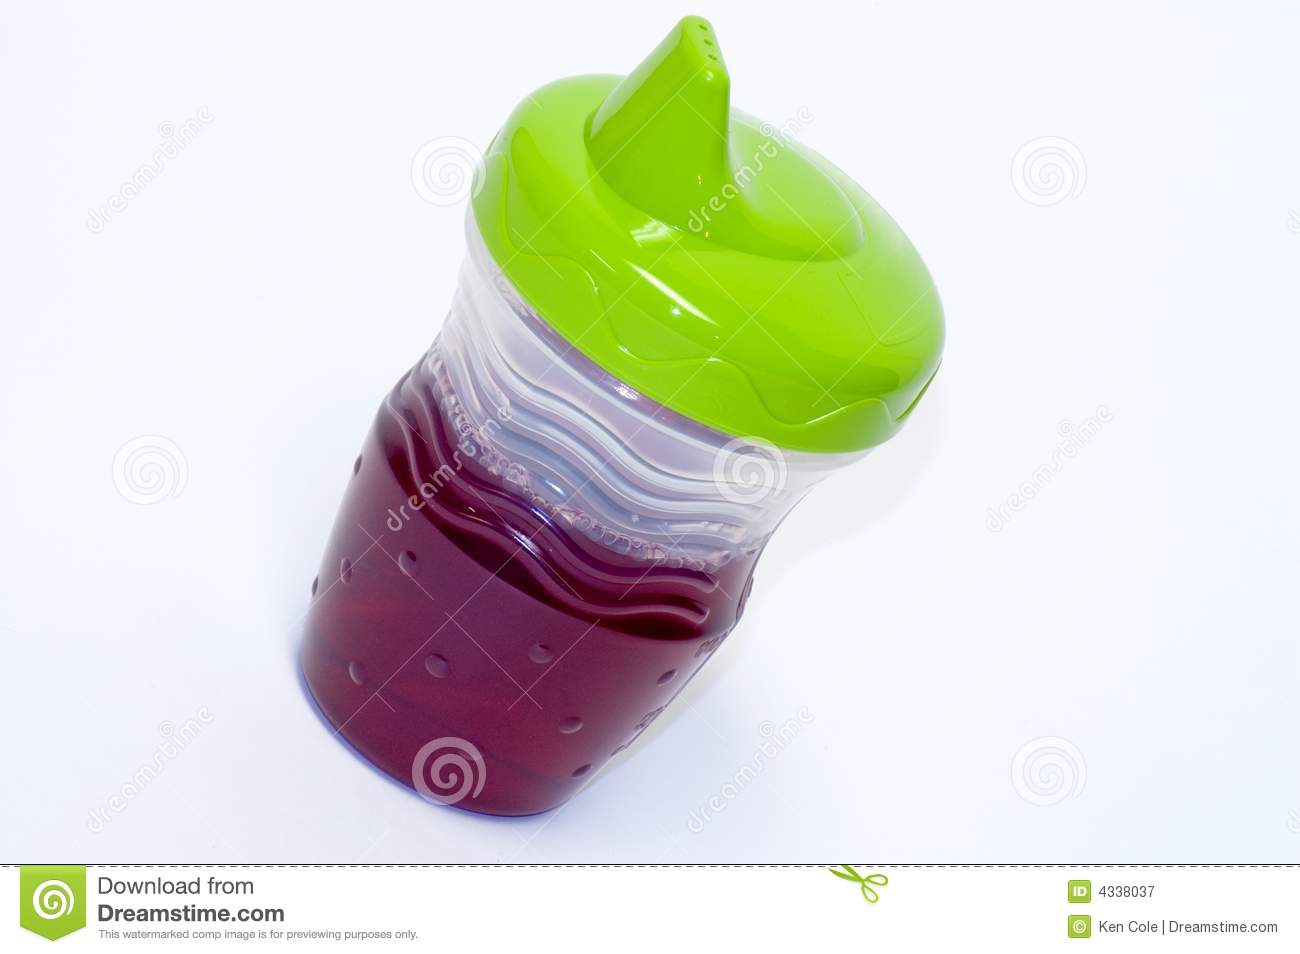 Child S Sippy Cup With Juice Royalty Free Stock Photography   Image